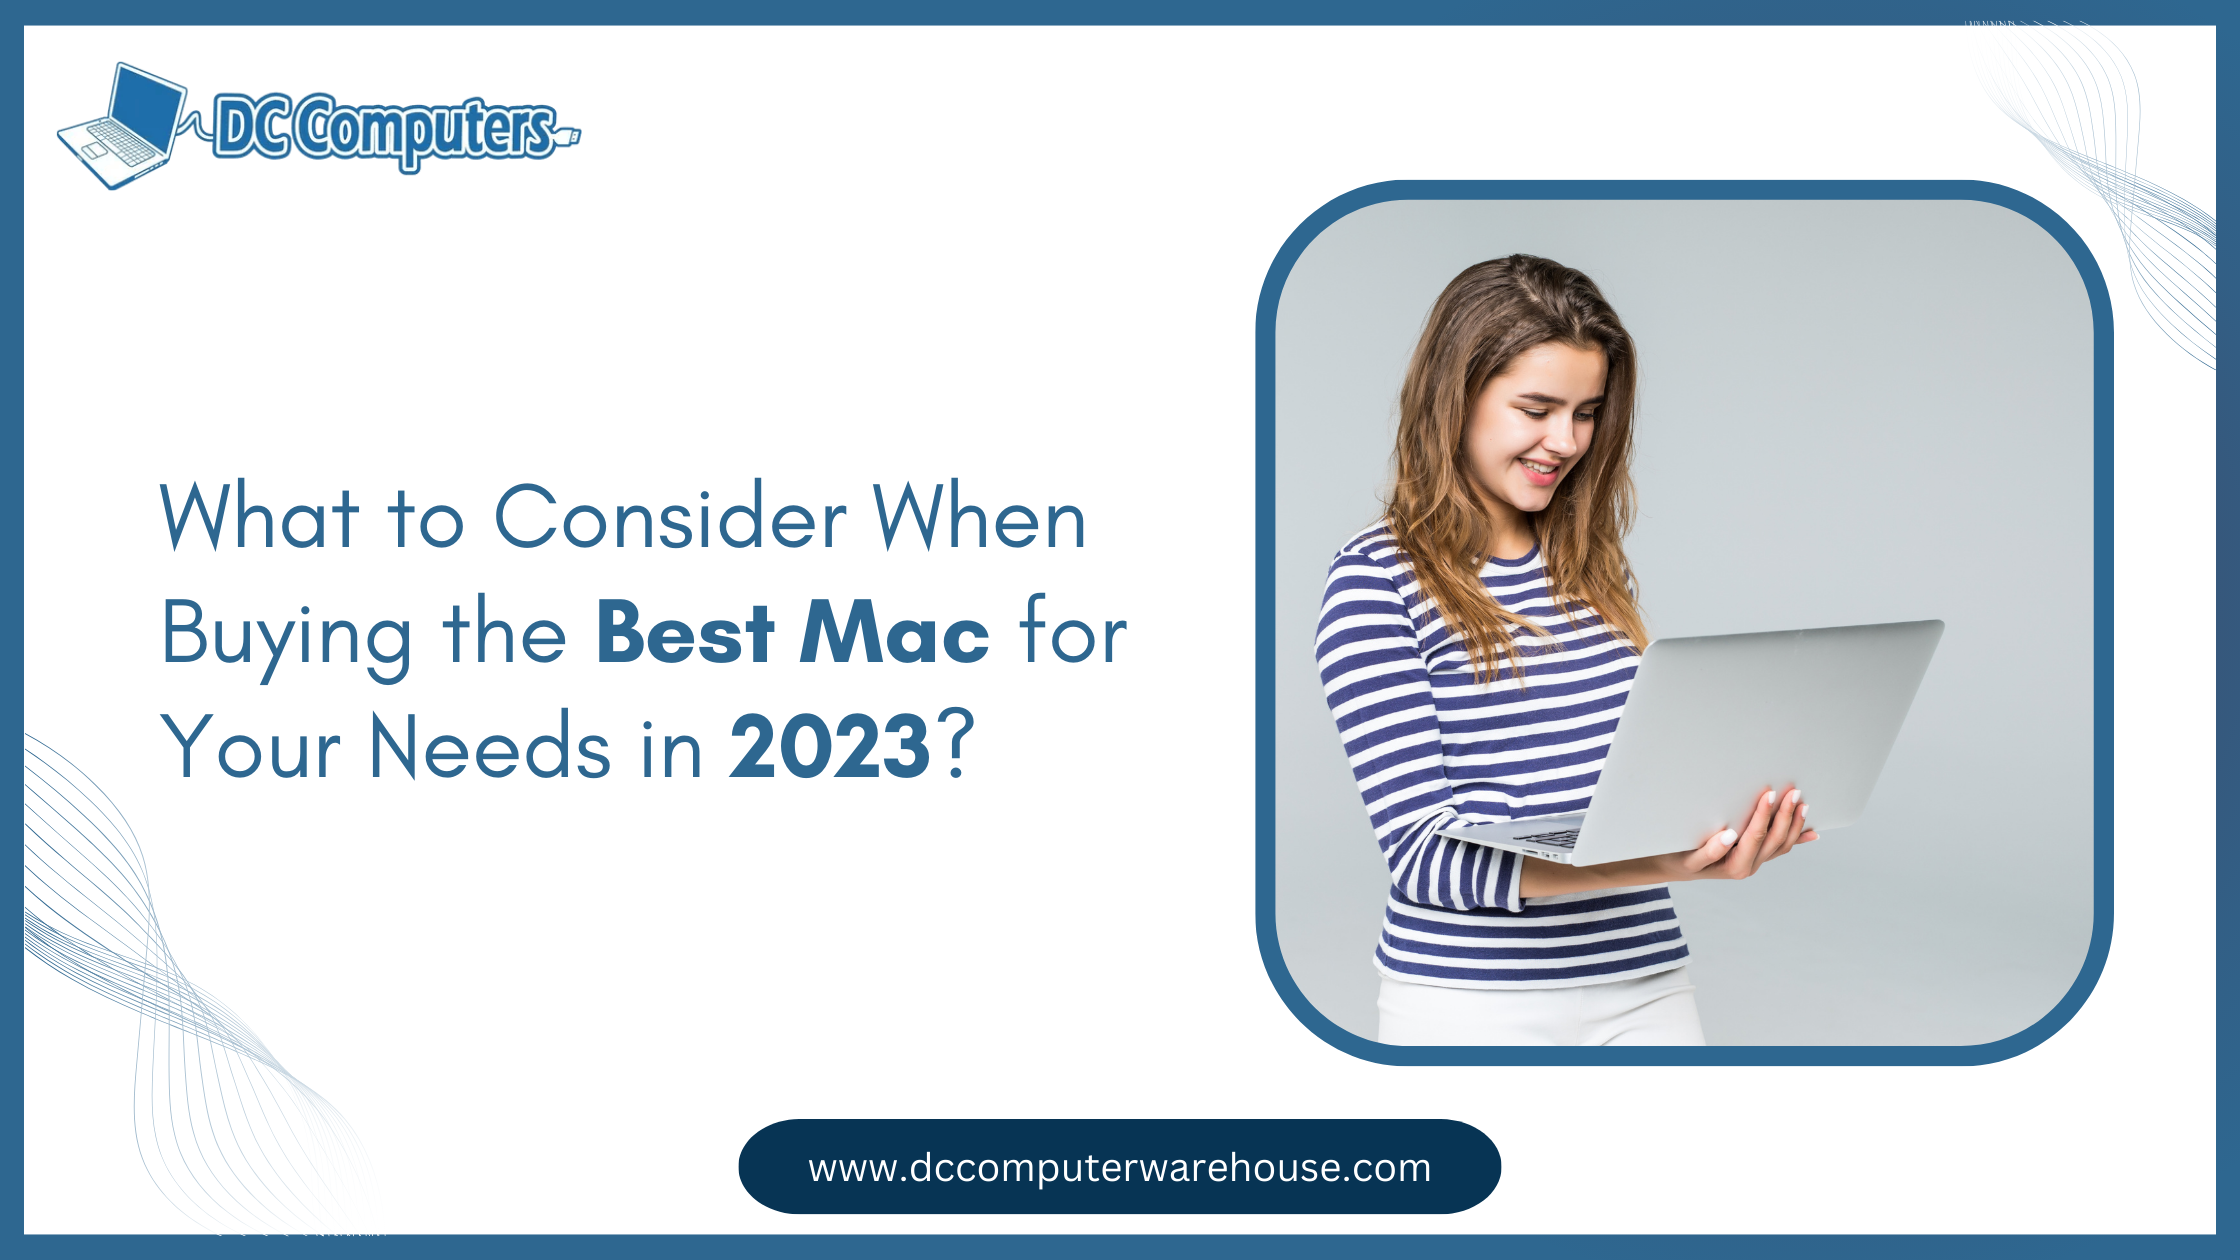 What to Consider When Buying the Best Mac for Your Needs in 2023